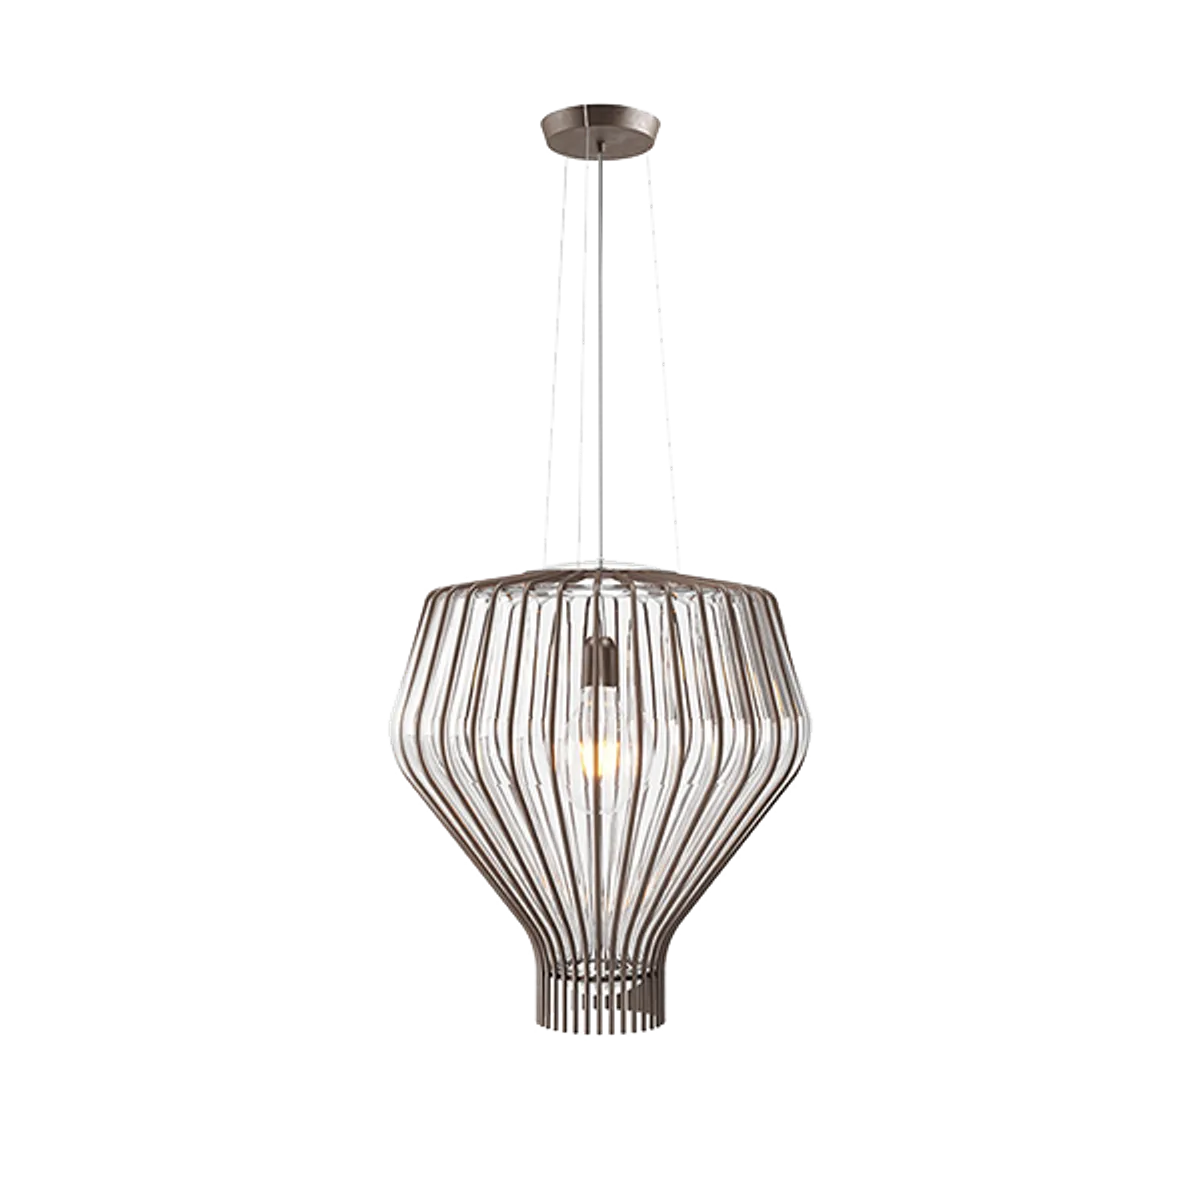 Saya Pendant Lamp 48Cm Uk Supplier Inside Out Contracts